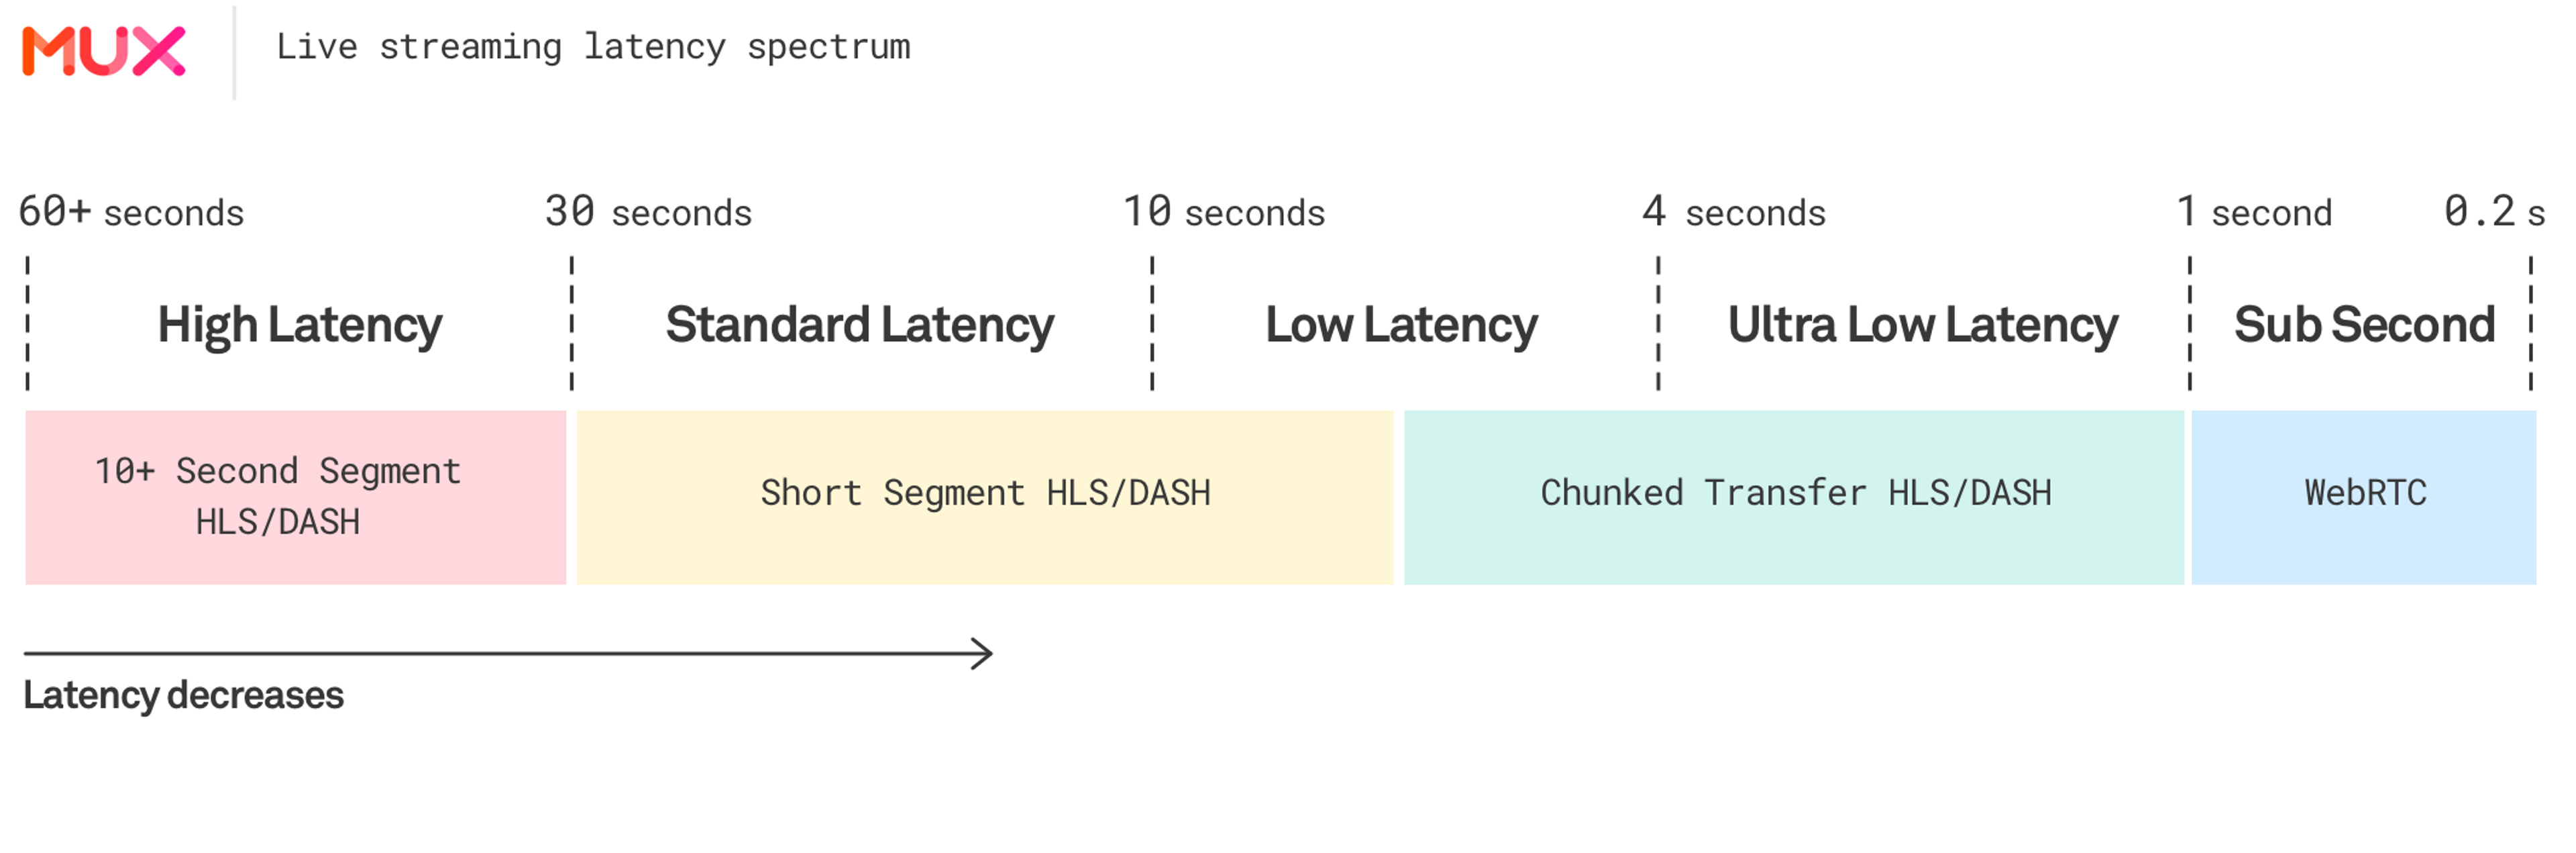 The Mux low latency live streaming spectrum - Mux 2019